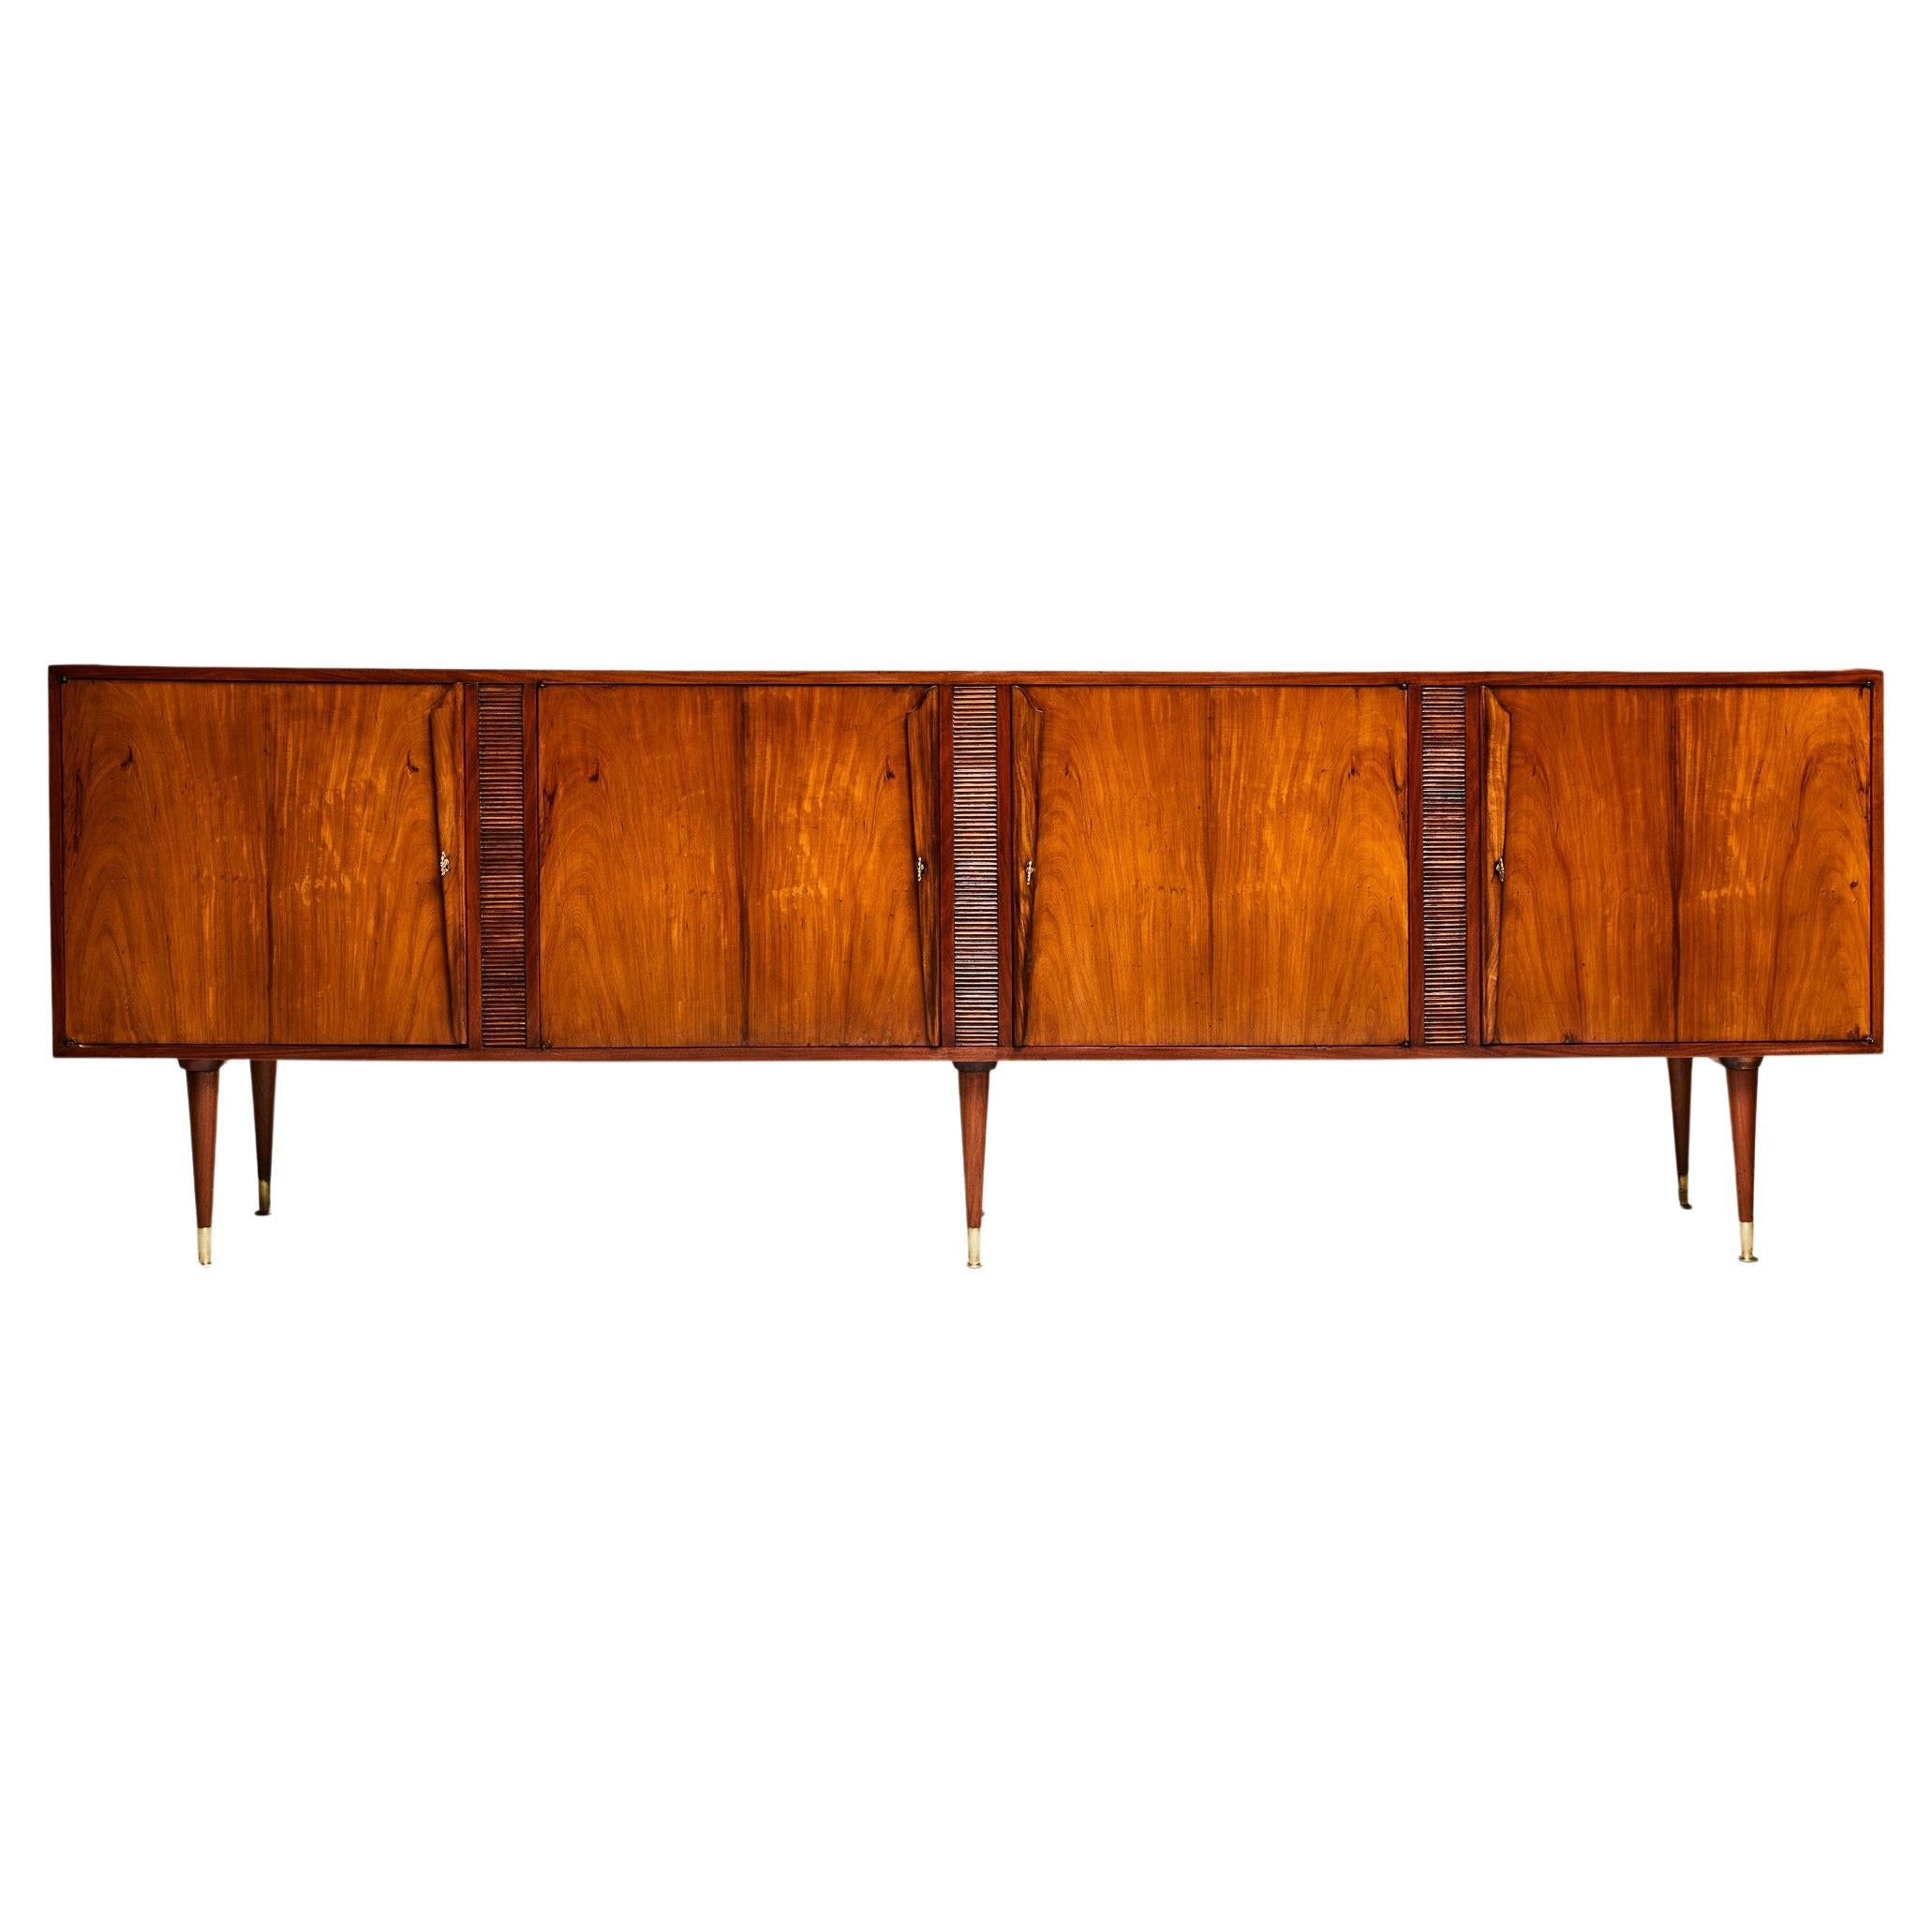 Available today, this Giuseppe Scapinelli’s stunning credenza is entirely made of Caviuna hardwood and features six bronze tipped tapered legs and has four doors, four hardwood drawers and 3 shelves. The original brass keys are available. The piece